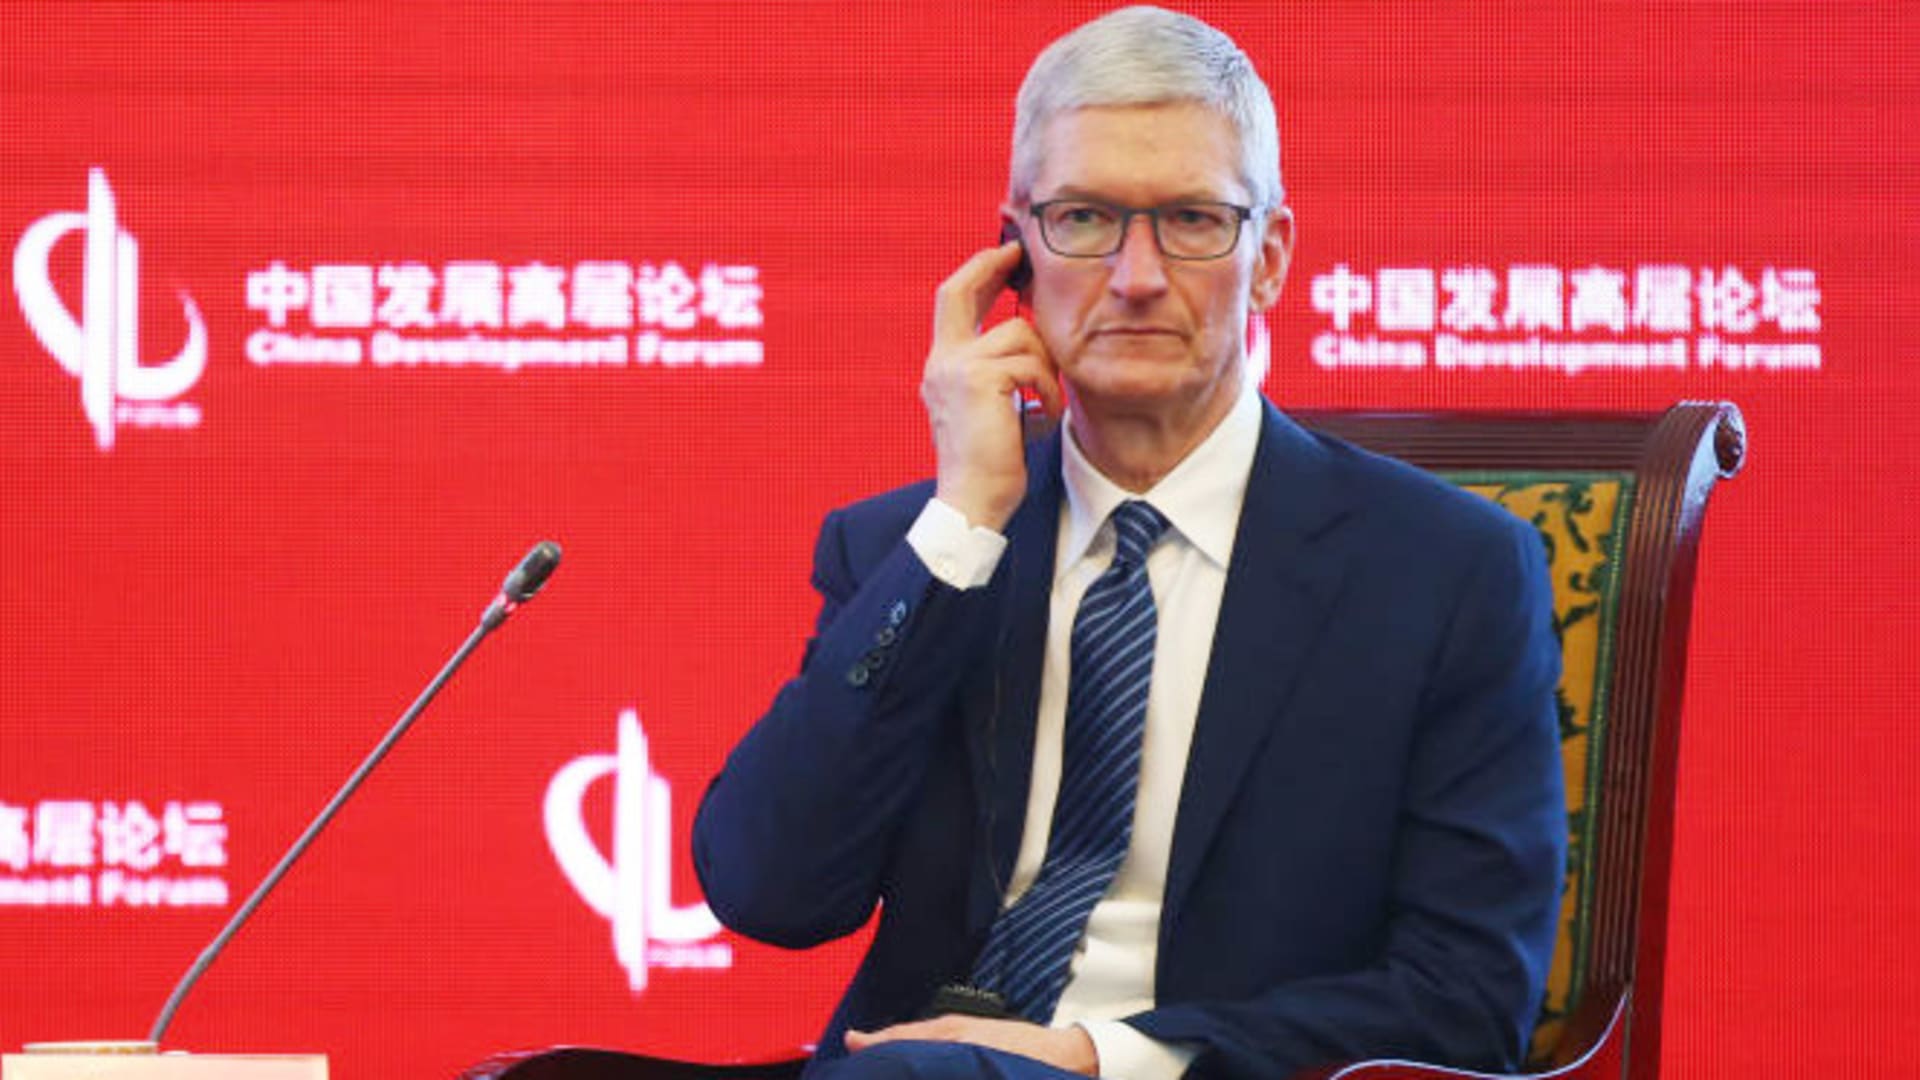 China says it hasn't banned iPhones or foreign devices for government